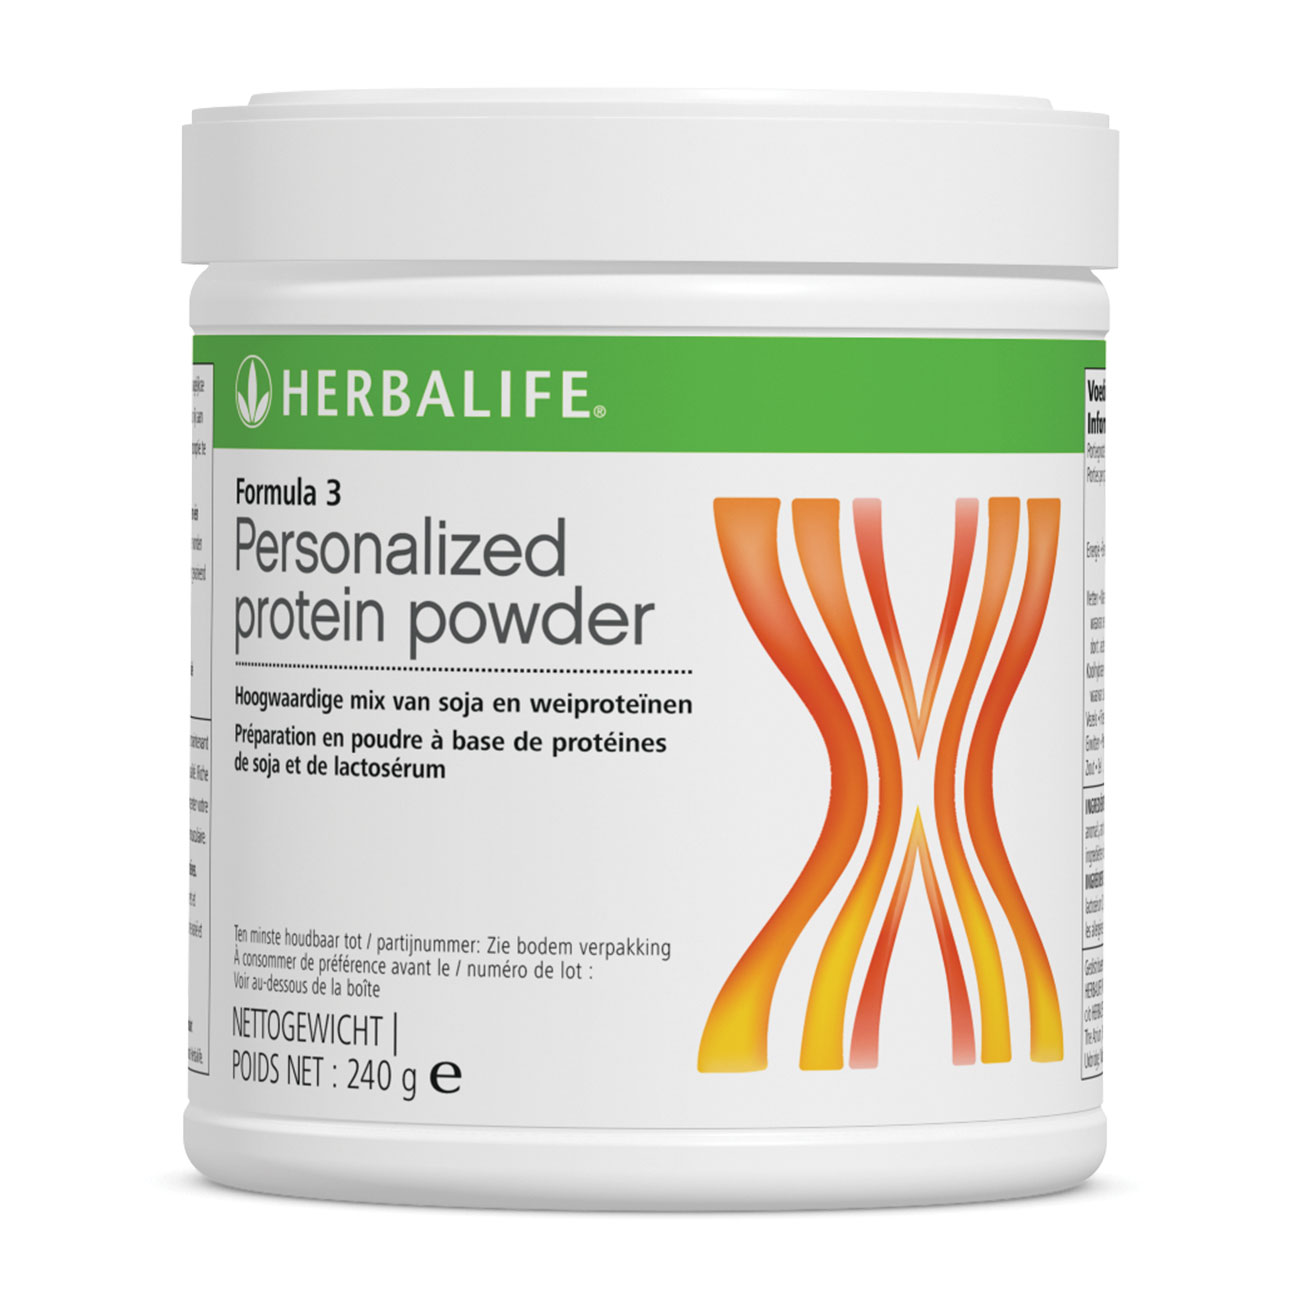 Formula 3 Personalized protein powder  product shot